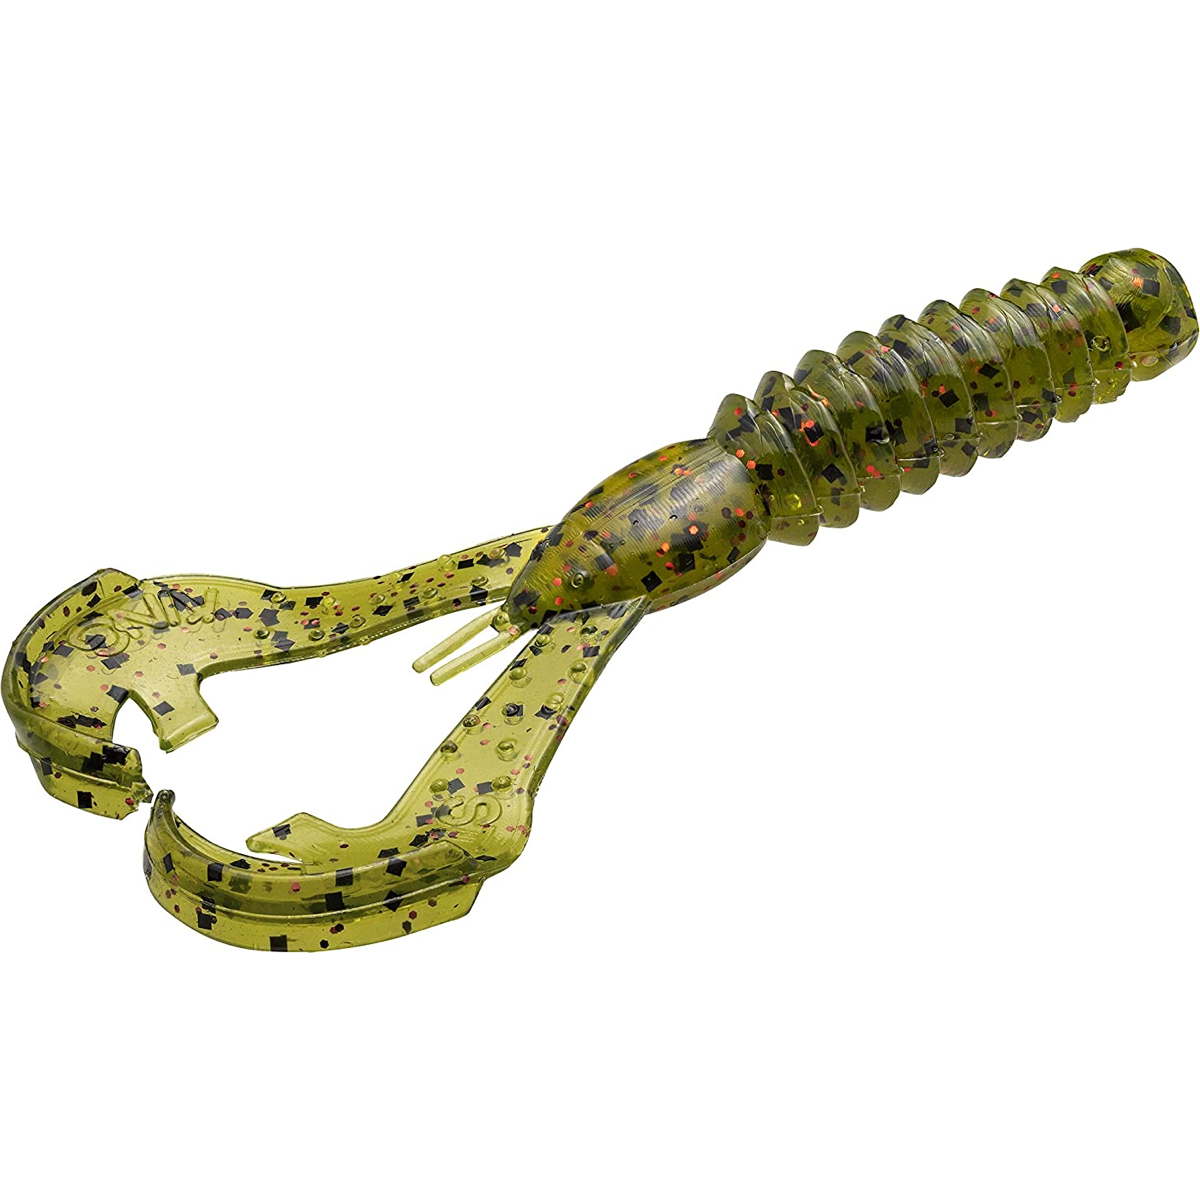 Photo of Strike King Rage Ned Craw for sale at United Tackle Shops.